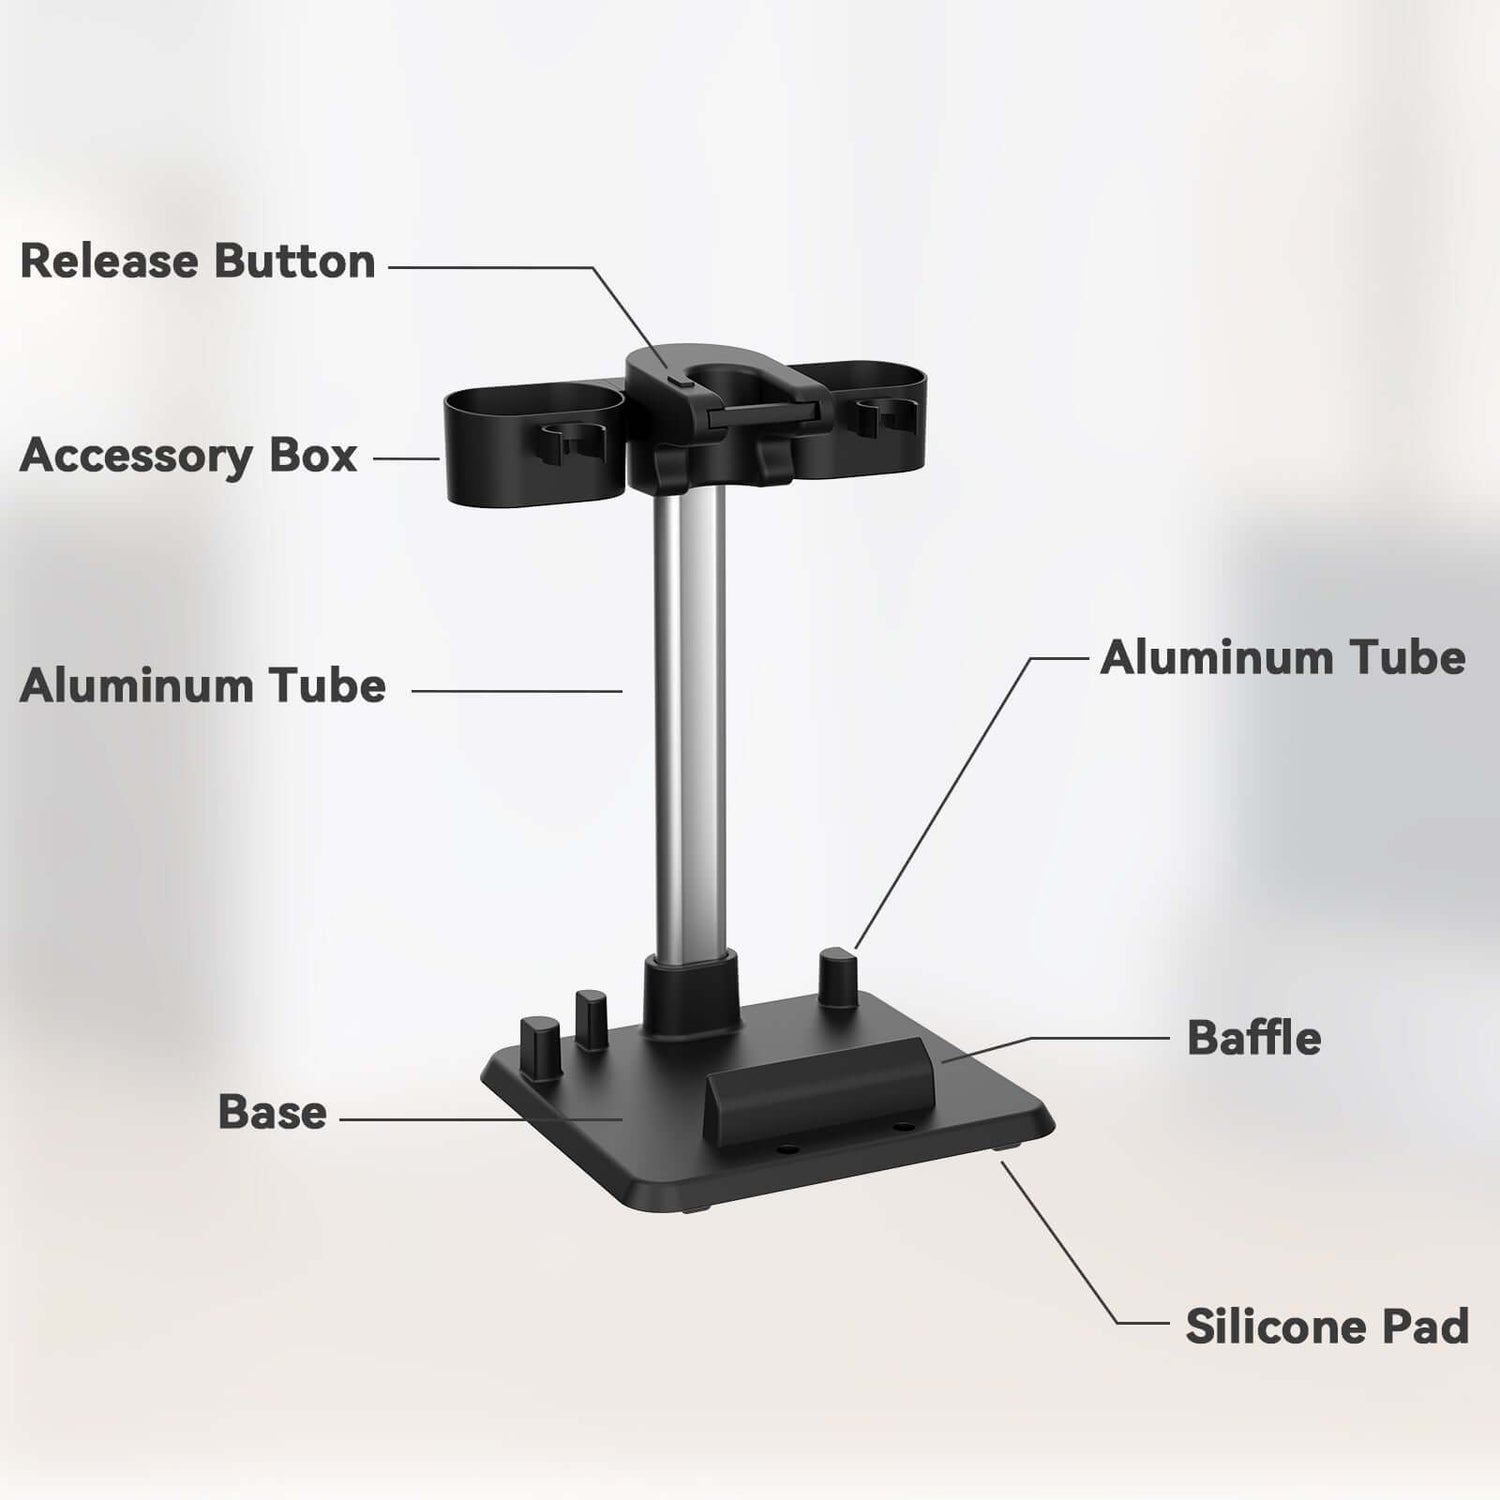 INSE Vacuum Stand for Cordless Vacuums-inselife.com